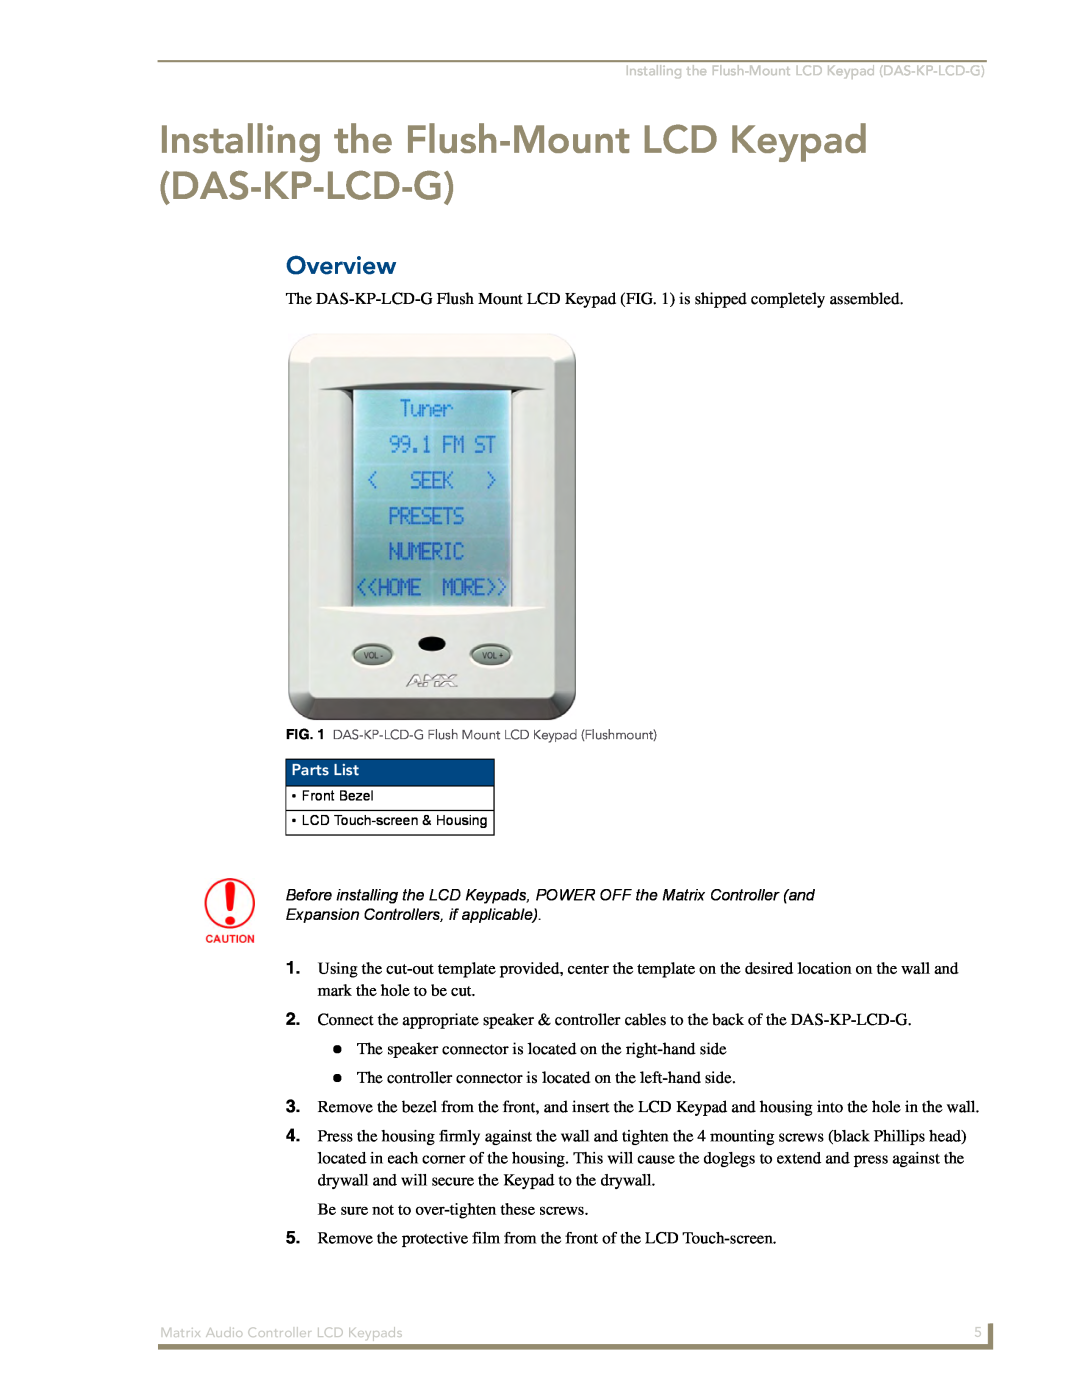 AMX DAS-KP-LCDS-W manual Installing the Flush-MountLCD Keypad DAS-KP-LCD-G, Overview 